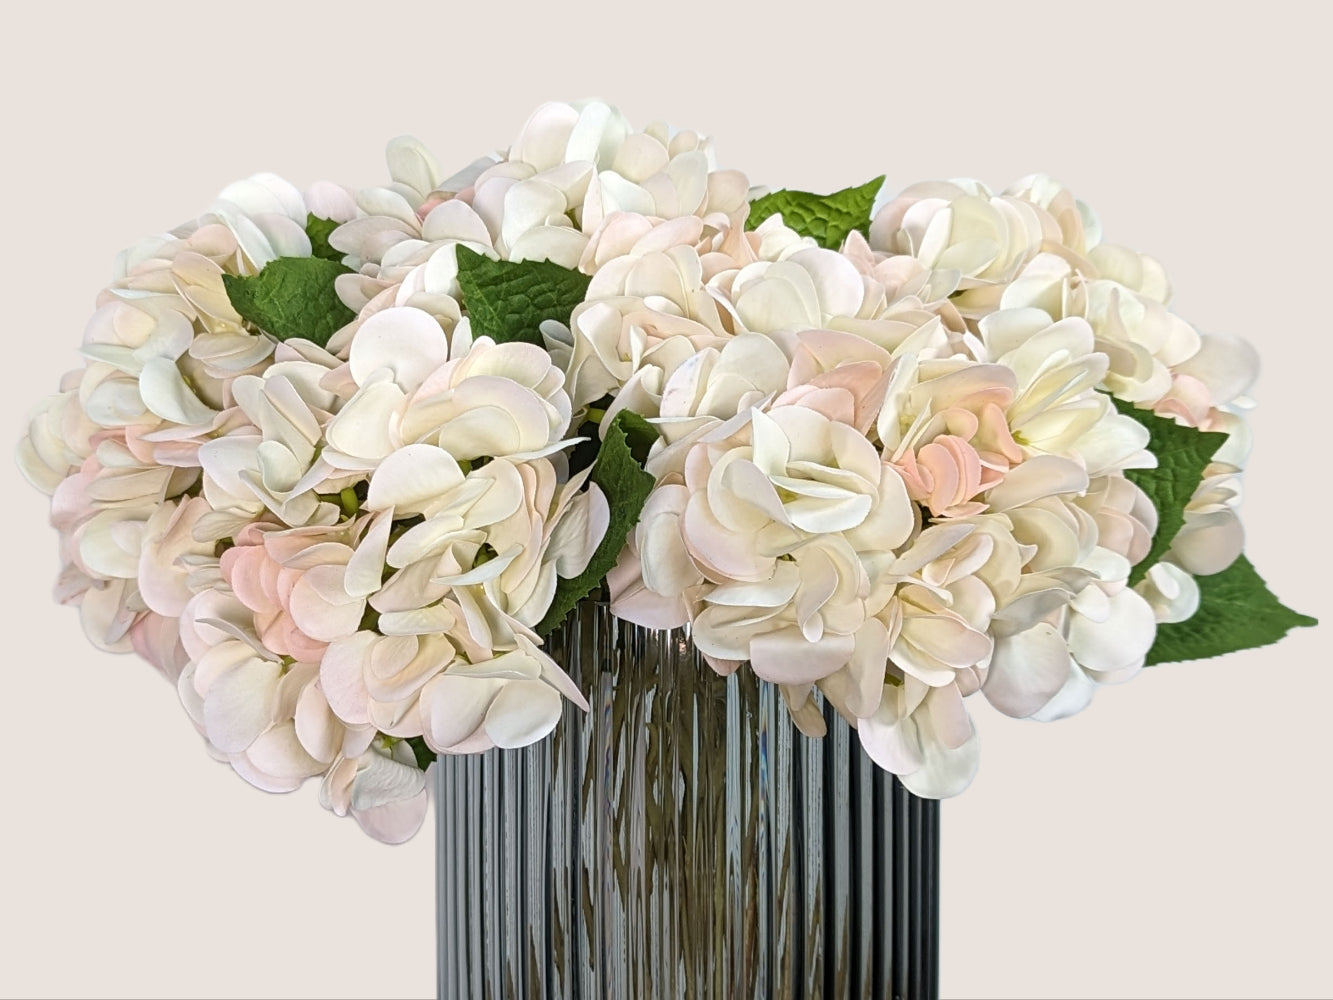 An image of a fluted smokey gray vase filled with artificial hydrangeas made with real touch materials that make them softer to the touch than traditional artificial flowers. The petals of the hydrangeas are creamy white with a faint soft pink on the tips, and the stem has a color gradient including brown and green for a realistic look. The vase stands against a white backdrop, providing a contrast that highlights the intricate details of the flowers and the texture of the vase.